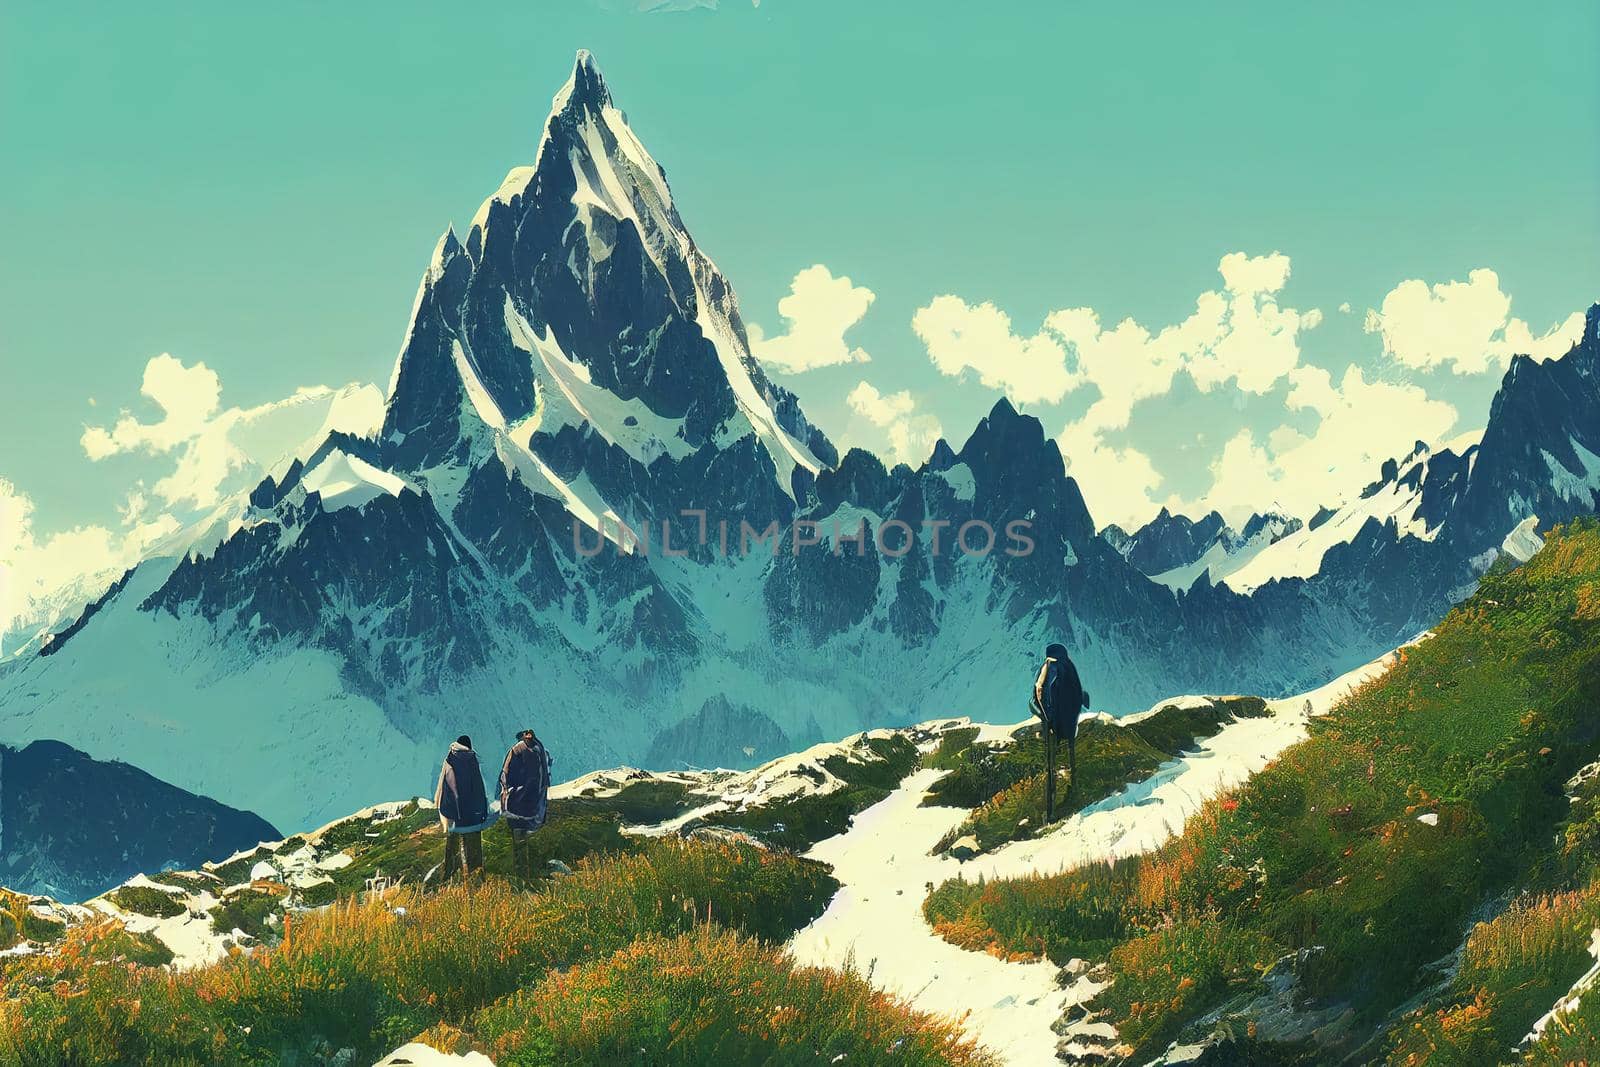 Amazing view on Monte Bianco mountains range with tourist on a foreground, Vallon de Berard Nature Preserve, Chamonix, Graian Alps, Landscape photography anime style, cartoon style toon style